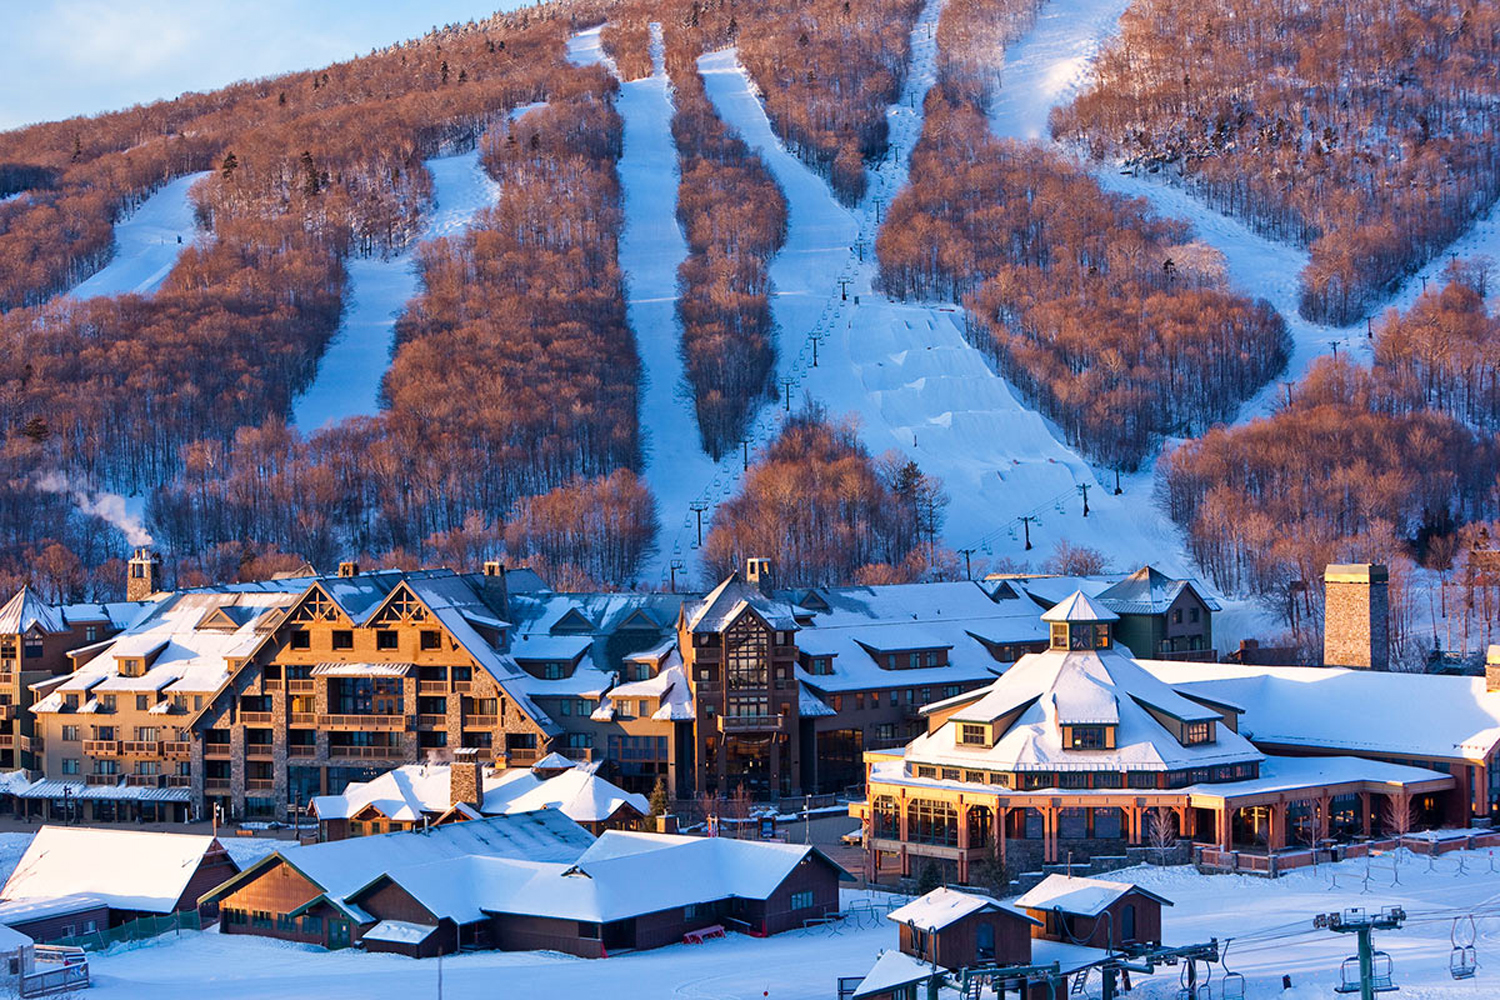 Spend some time in Stowe, Vermont in 2022